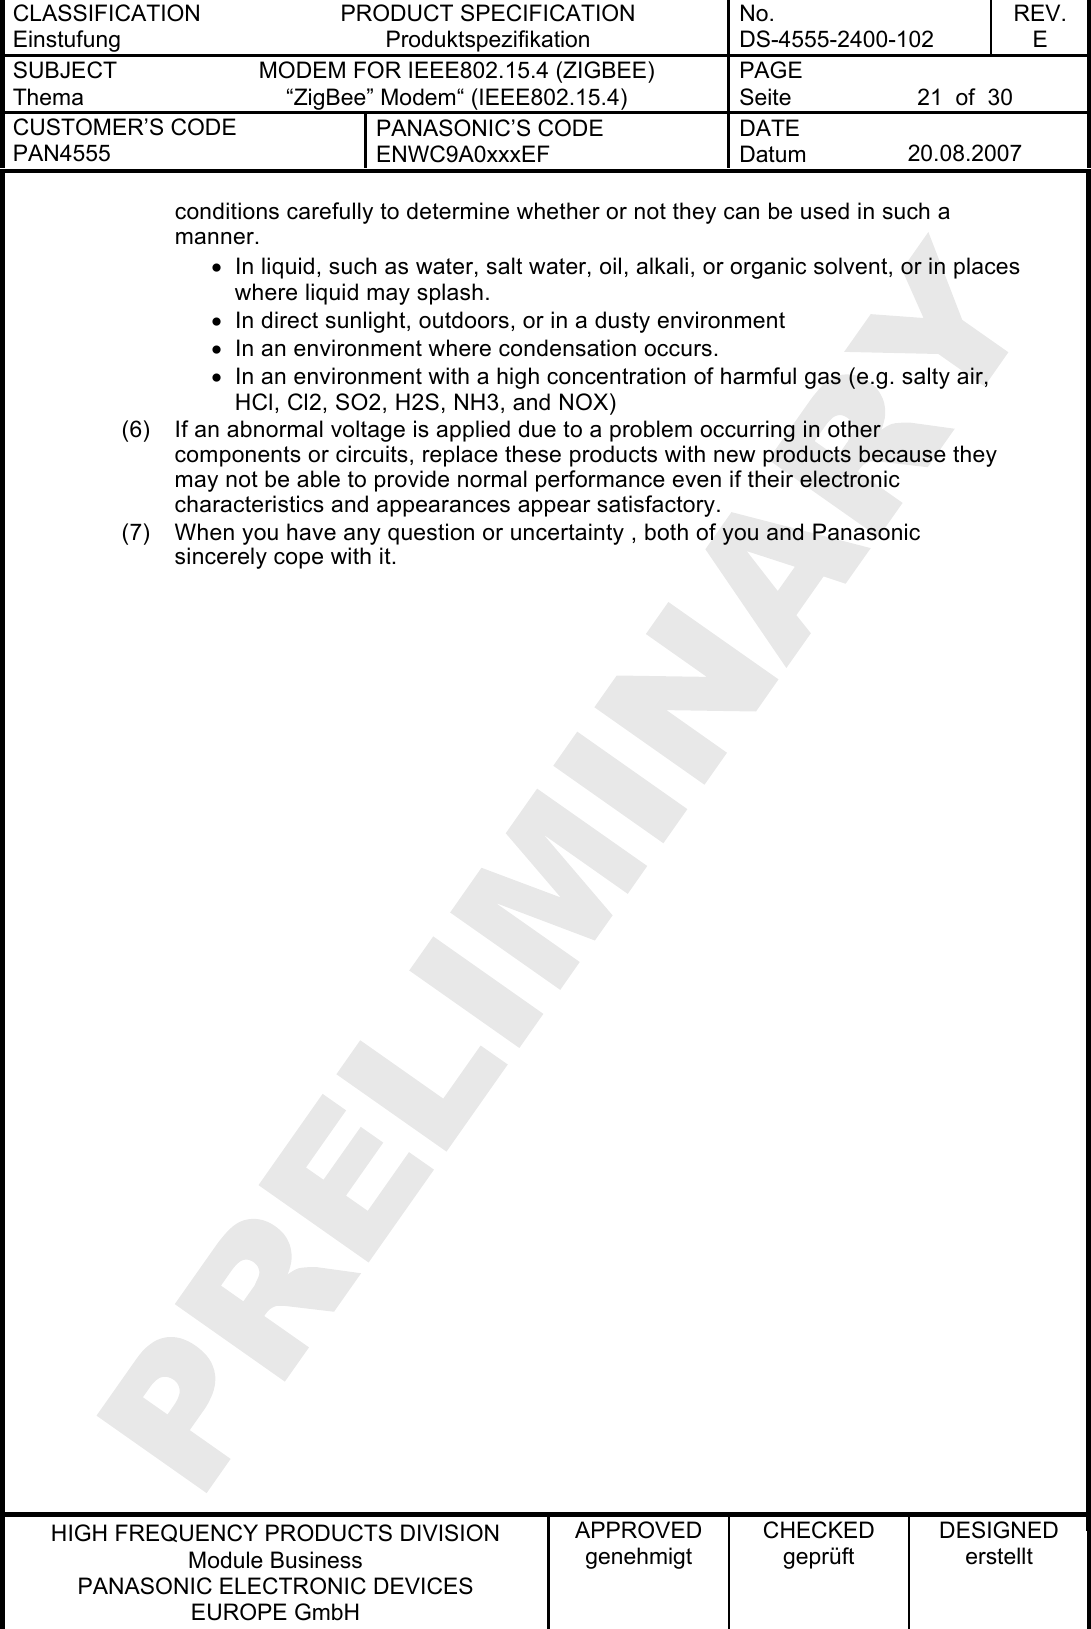 CLASSIFICATION Einstufung PRODUCT SPECIFICATION Produktspezifikation No. DS-4555-2400-102 REV. E SUBJECT Thema MODEM FOR IEEE802.15.4 (ZIGBEE) “ZigBee” Modem“ (IEEE802.15.4) PAGE Seite  21  of  30 CUSTOMER’S CODE PAN4555 PANASONIC’S CODE ENWC9A0xxxEF DATE Datum  20.08.2007   HIGH FREQUENCY PRODUCTS DIVISION Module Business PANASONIC ELECTRONIC DEVICES  EUROPE GmbH APPROVED genehmigt CHECKED geprüft DESIGNED erstellt conditions carefully to determine whether or not they can be used in such a manner. •  In liquid, such as water, salt water, oil, alkali, or organic solvent, or in places where liquid may splash. •  In direct sunlight, outdoors, or in a dusty environment •  In an environment where condensation occurs. •  In an environment with a high concentration of harmful gas (e.g. salty air, HCl, Cl2, SO2, H2S, NH3, and NOX) (6)  If an abnormal voltage is applied due to a problem occurring in other components or circuits, replace these products with new products because they may not be able to provide normal performance even if their electronic characteristics and appearances appear satisfactory. (7)  When you have any question or uncertainty , both of you and Panasonic sincerely cope with it.  